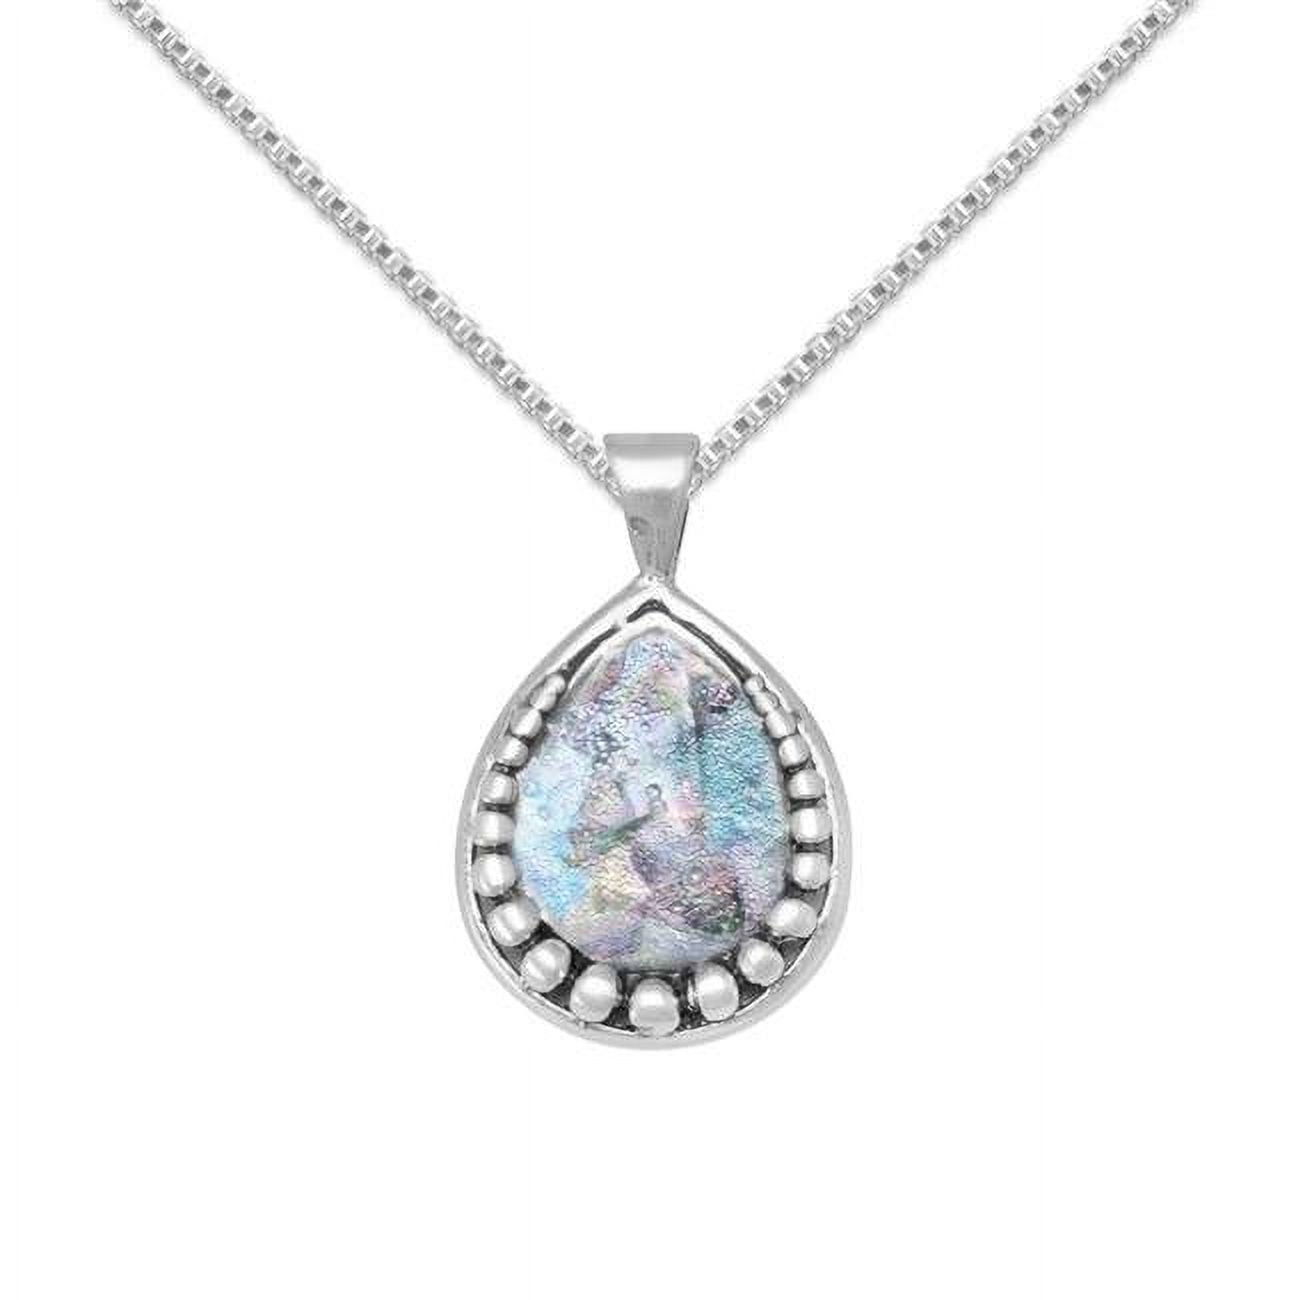 73444-18 18 In. Sterling Silver Pear Shape Roman Glass Pendant With 1.5 Mm Box Chain